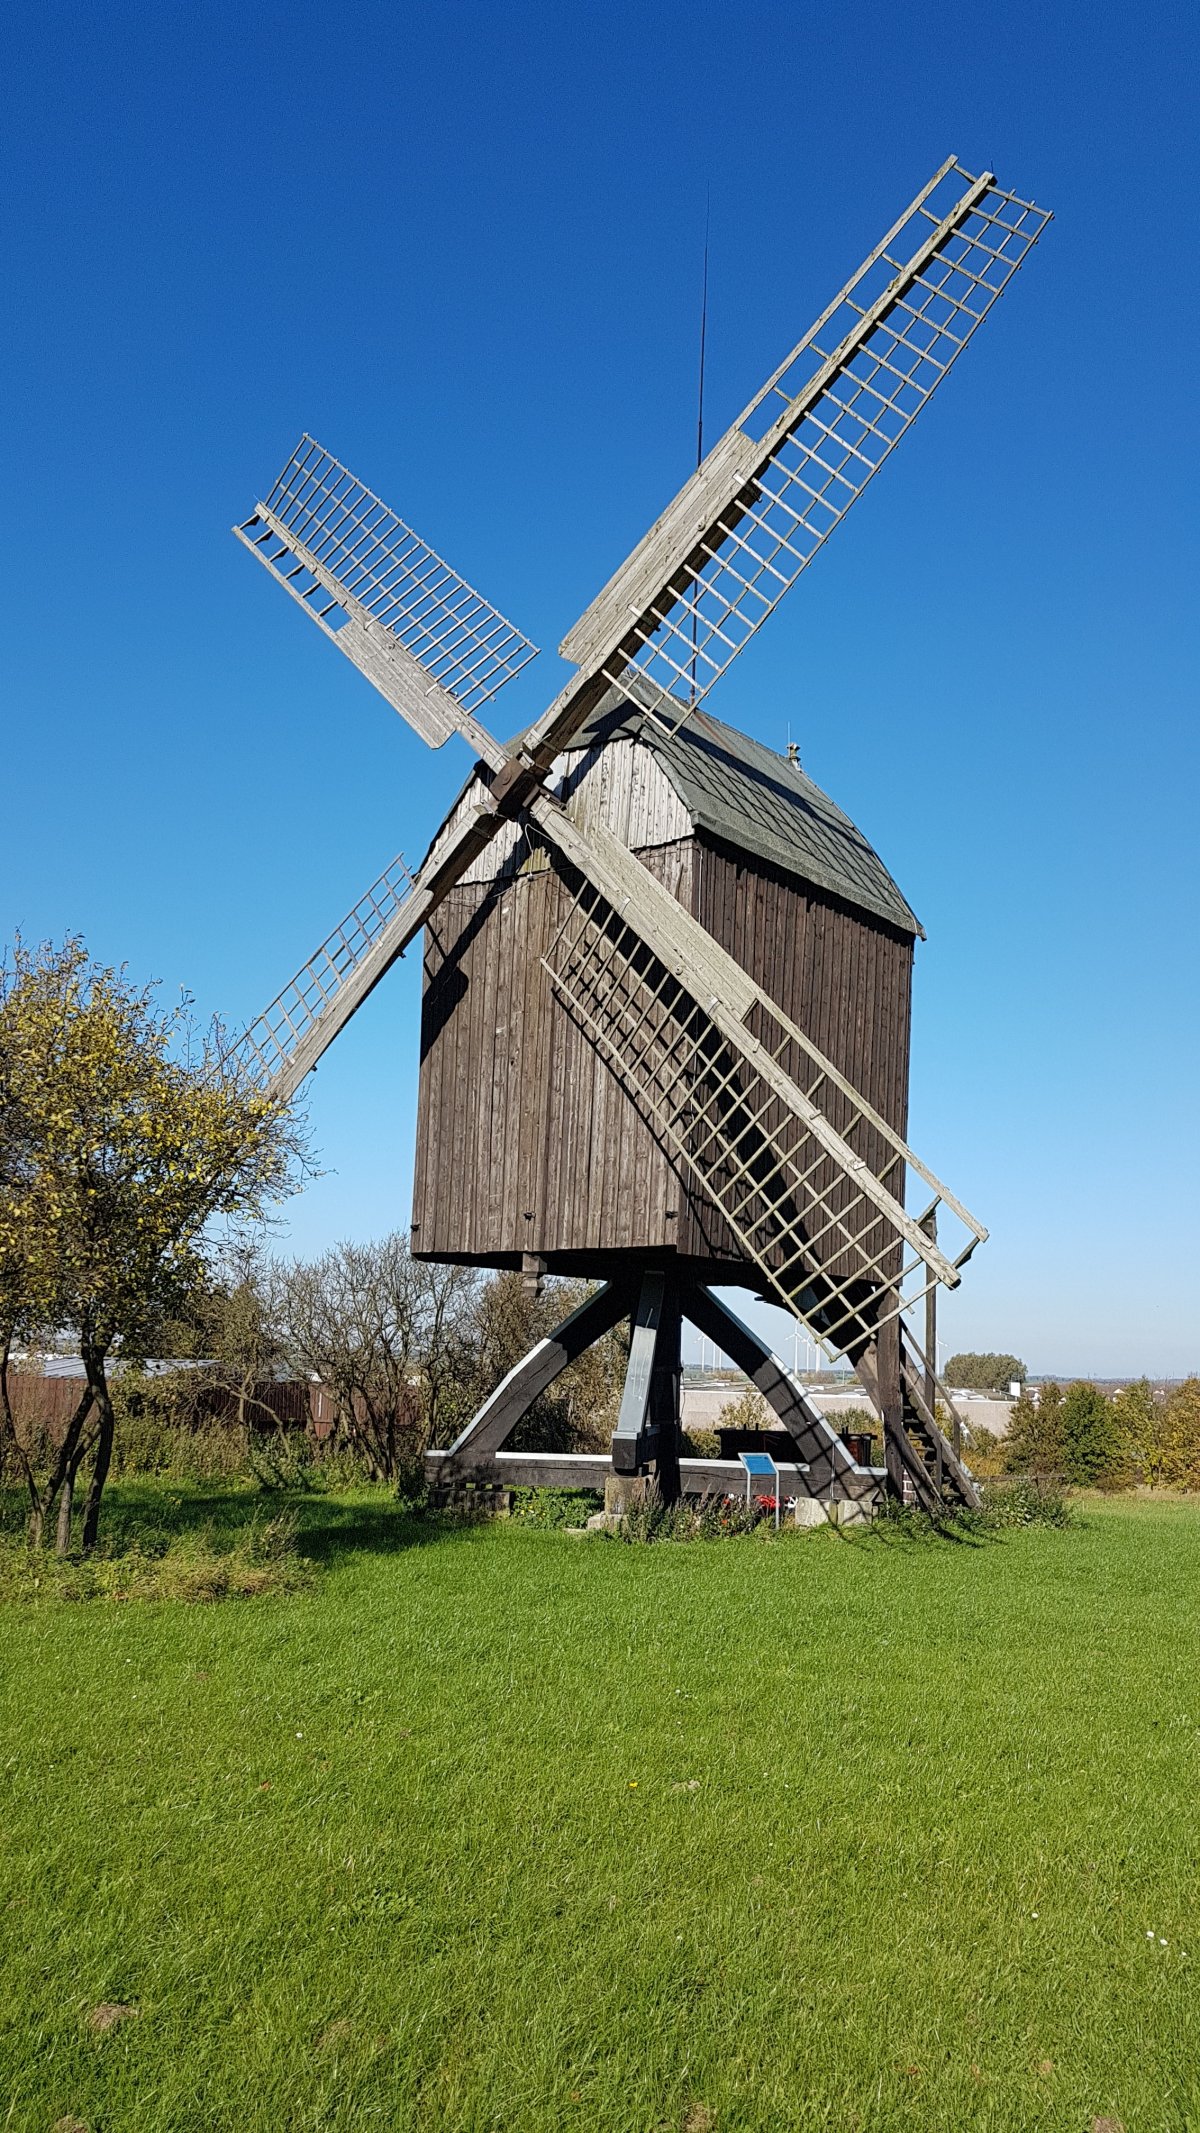 Picture of windmill on the grass